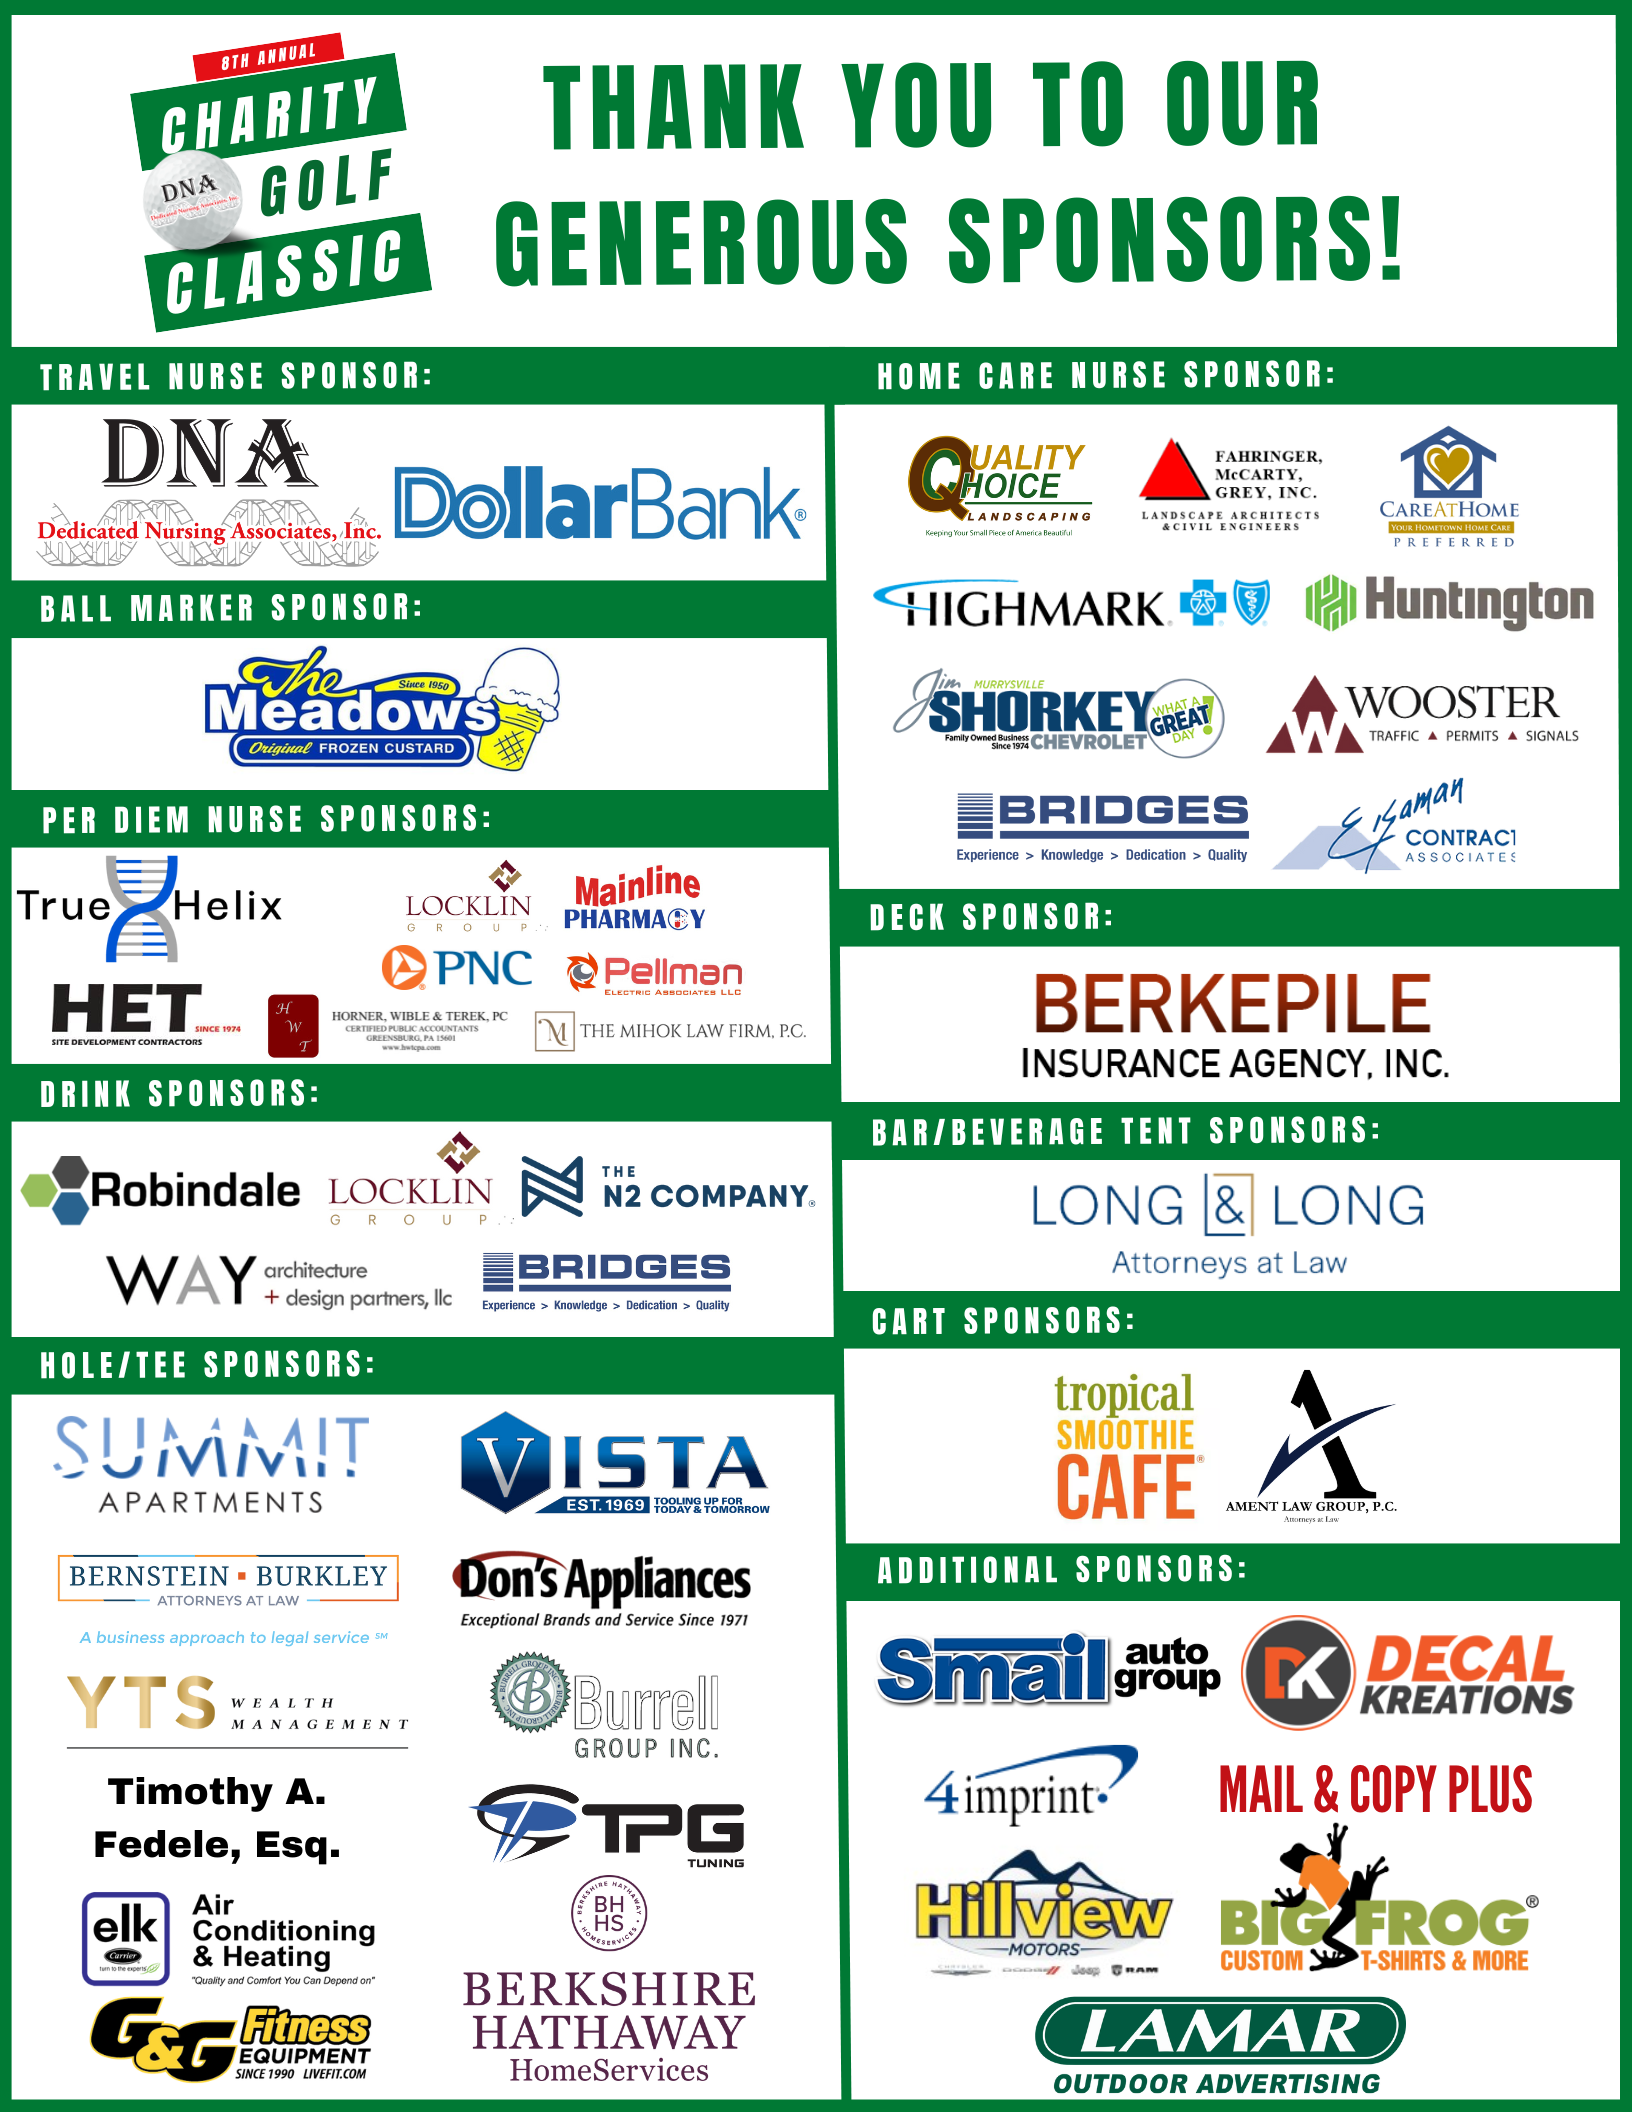 List of sponsors that contributed to the charity golf outing